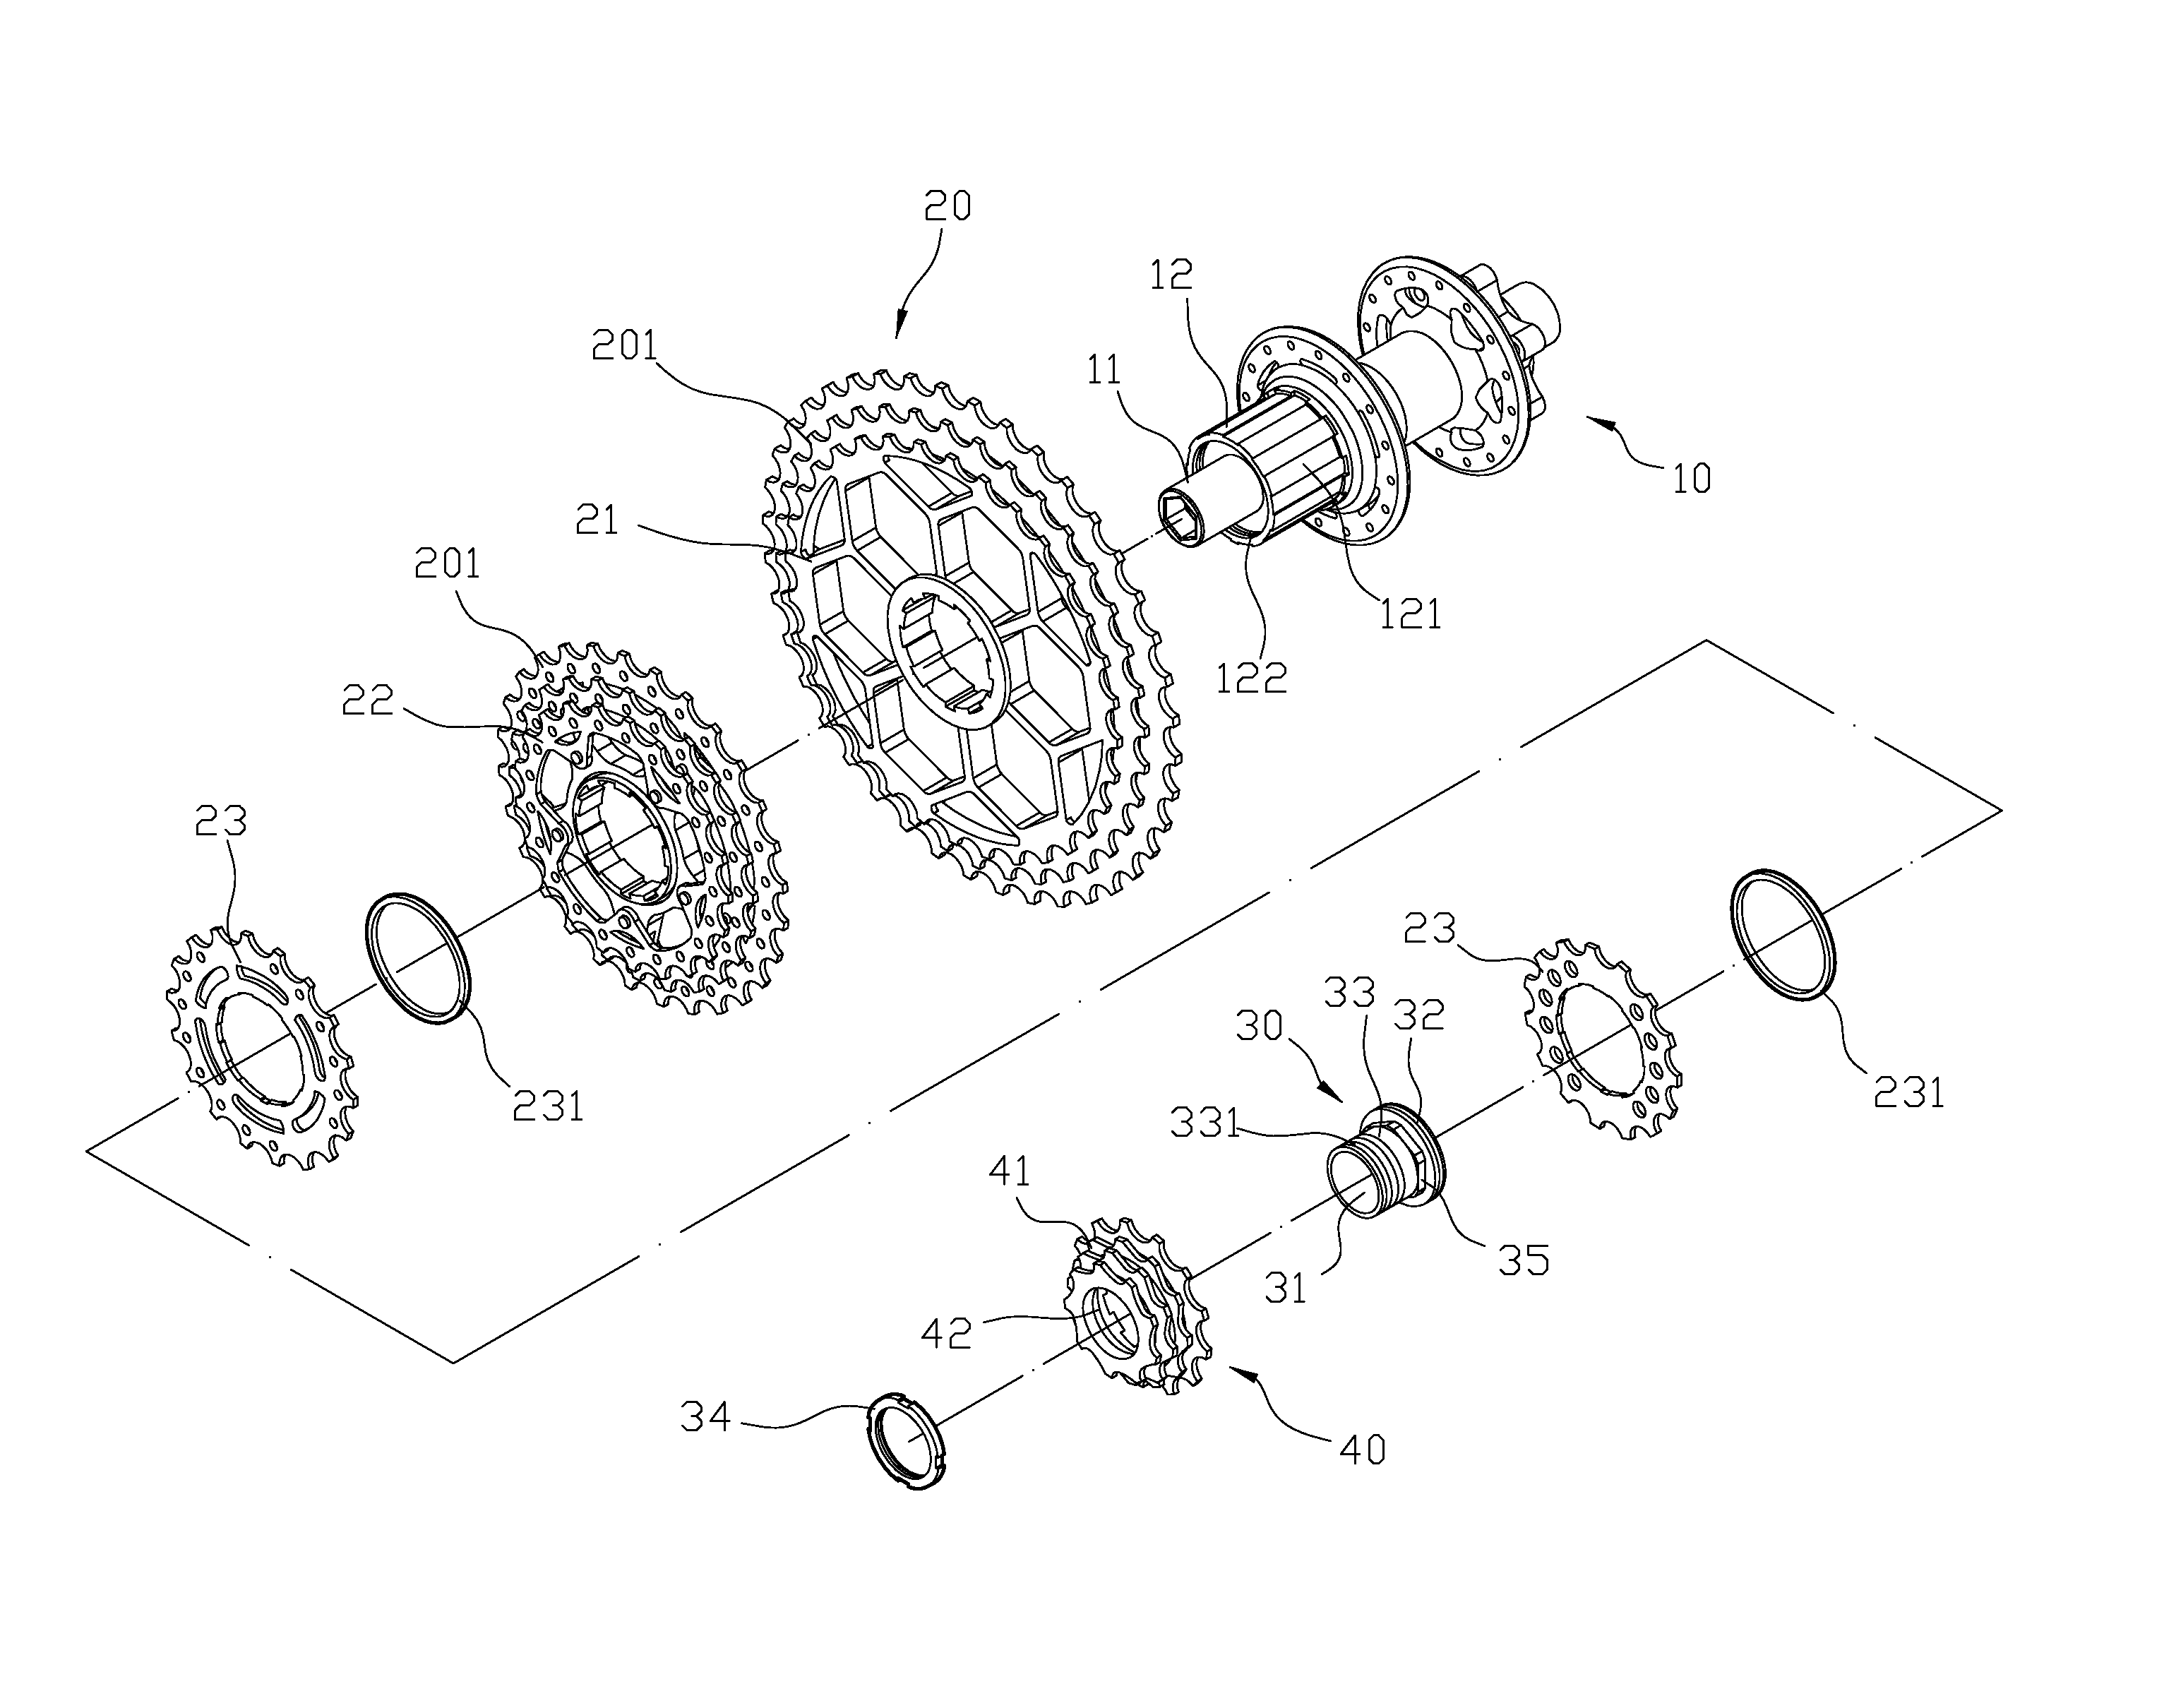 Bicycle hub and flywheel structure